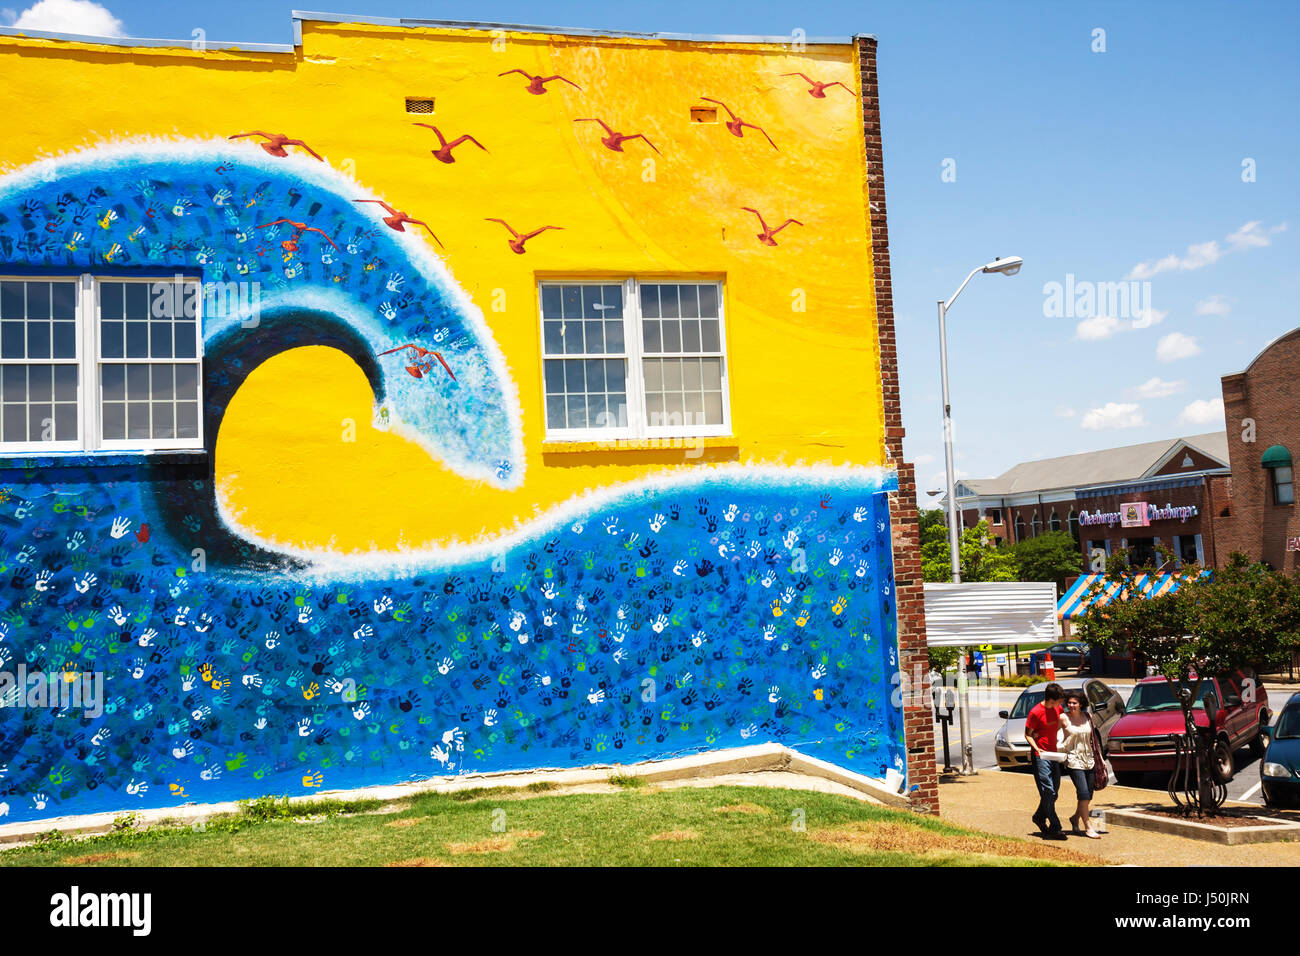 Auburn Alabama,North College Street,male,female,student students couple,college town,building mural,yellow,blue,waves,water,seagulls,handprints,public Stock Photo